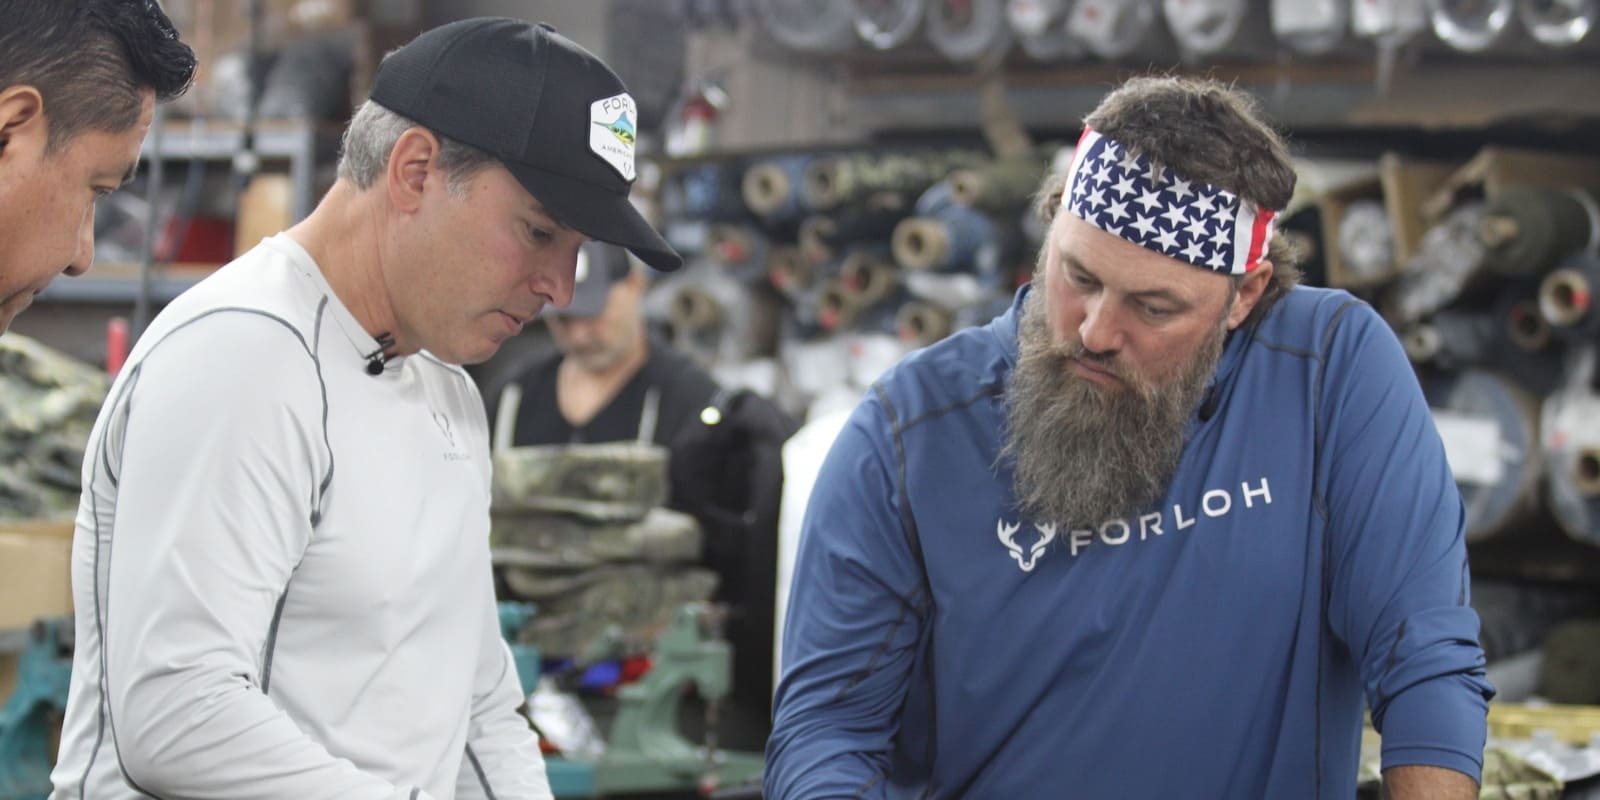 Willie Robertson and Andy Techmanski at FORLOH factory